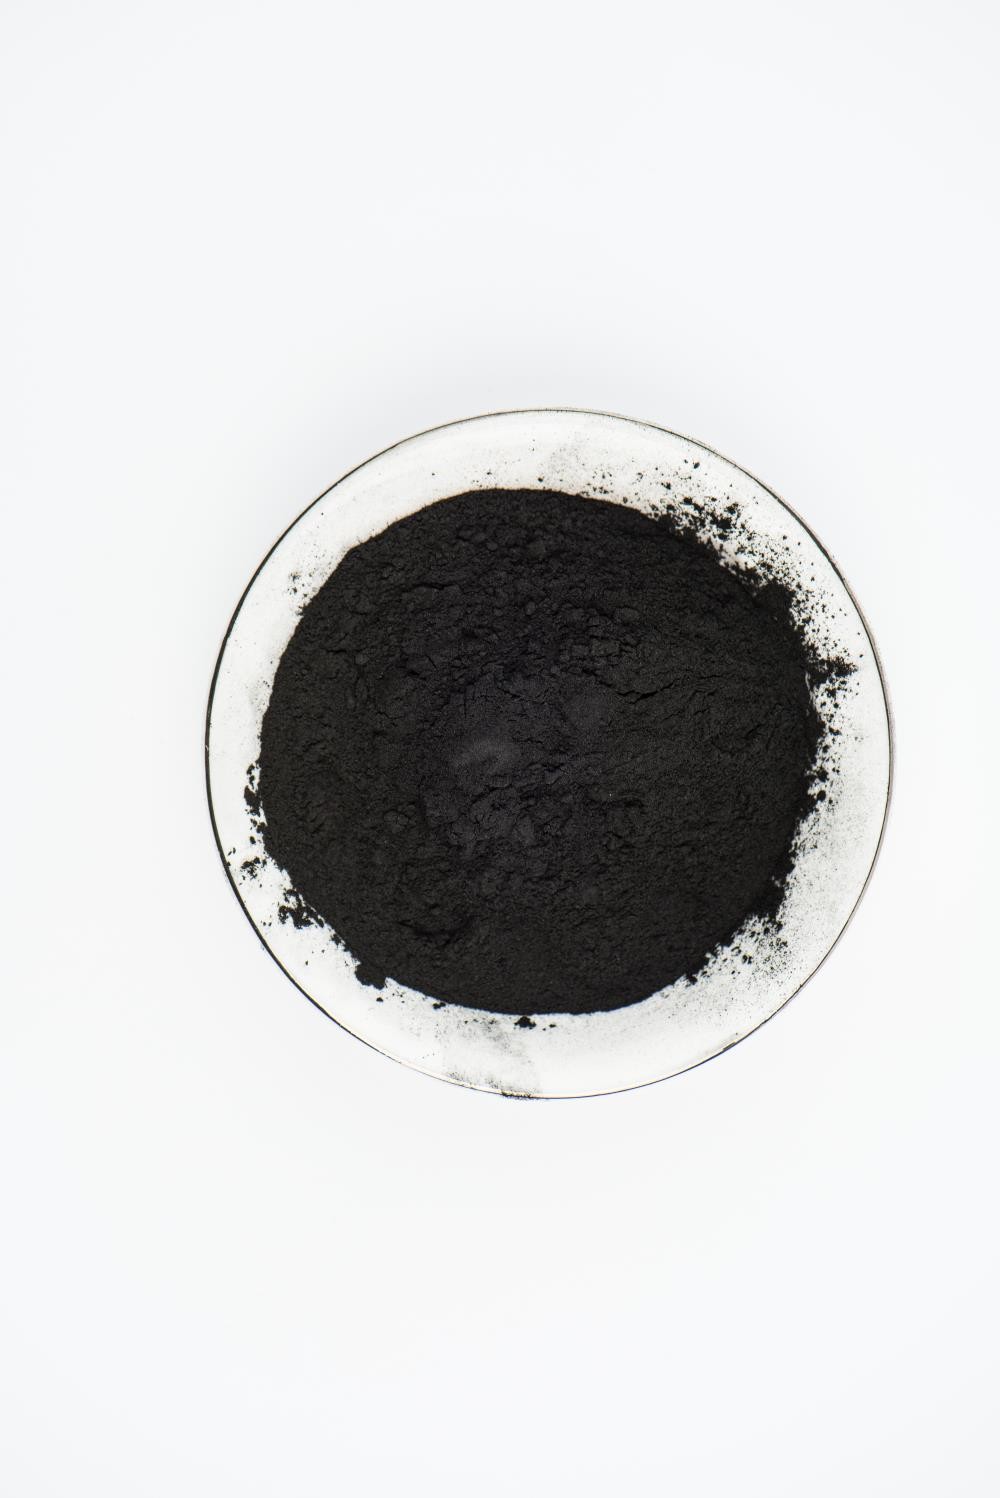 Wholesale Industrial Activated Carbon Medicine 767 Wood Based Black Charcoal Medicine from china suppliers